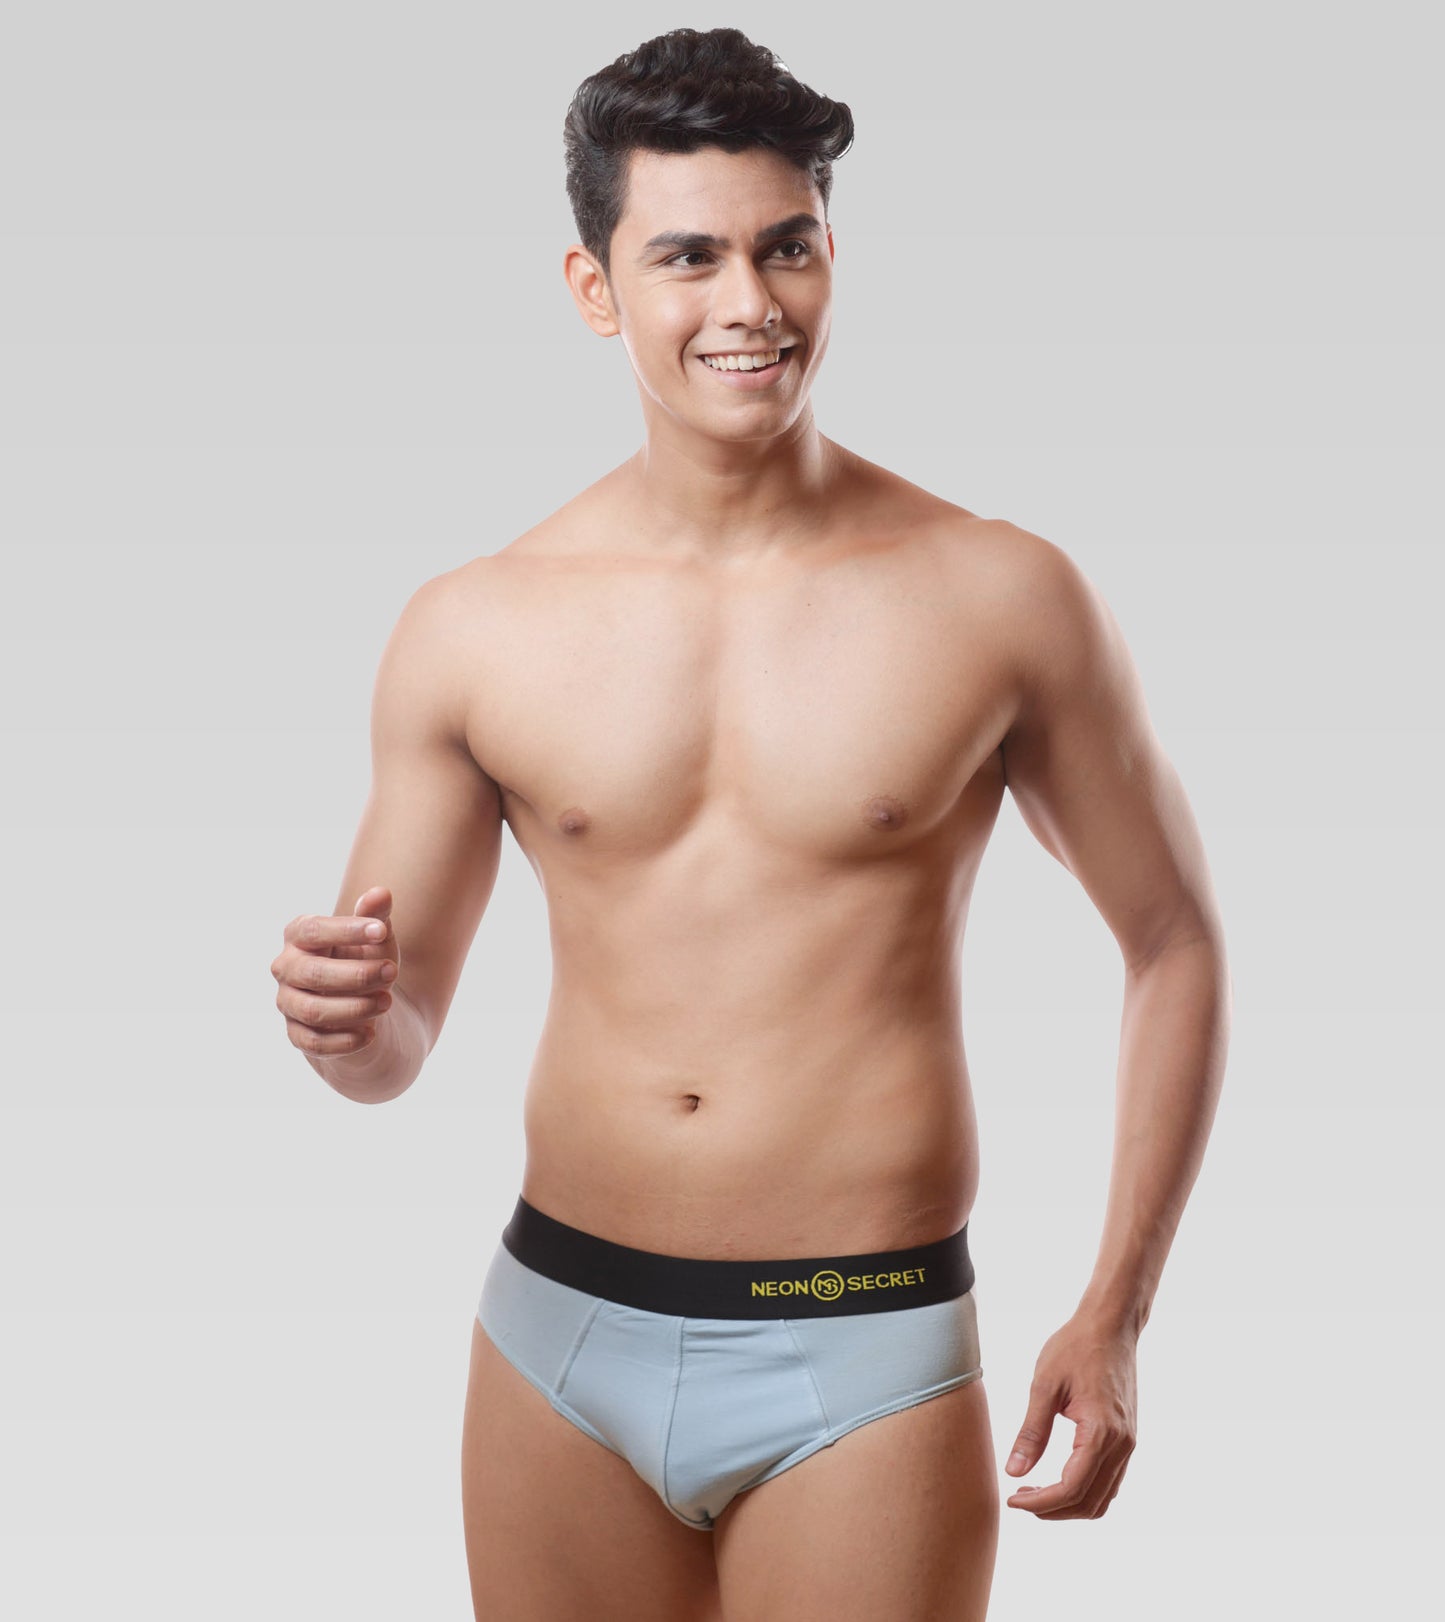 Men's Breathable Briefs- Pack of 3 (Pine Green, Martini Blue, Claret)